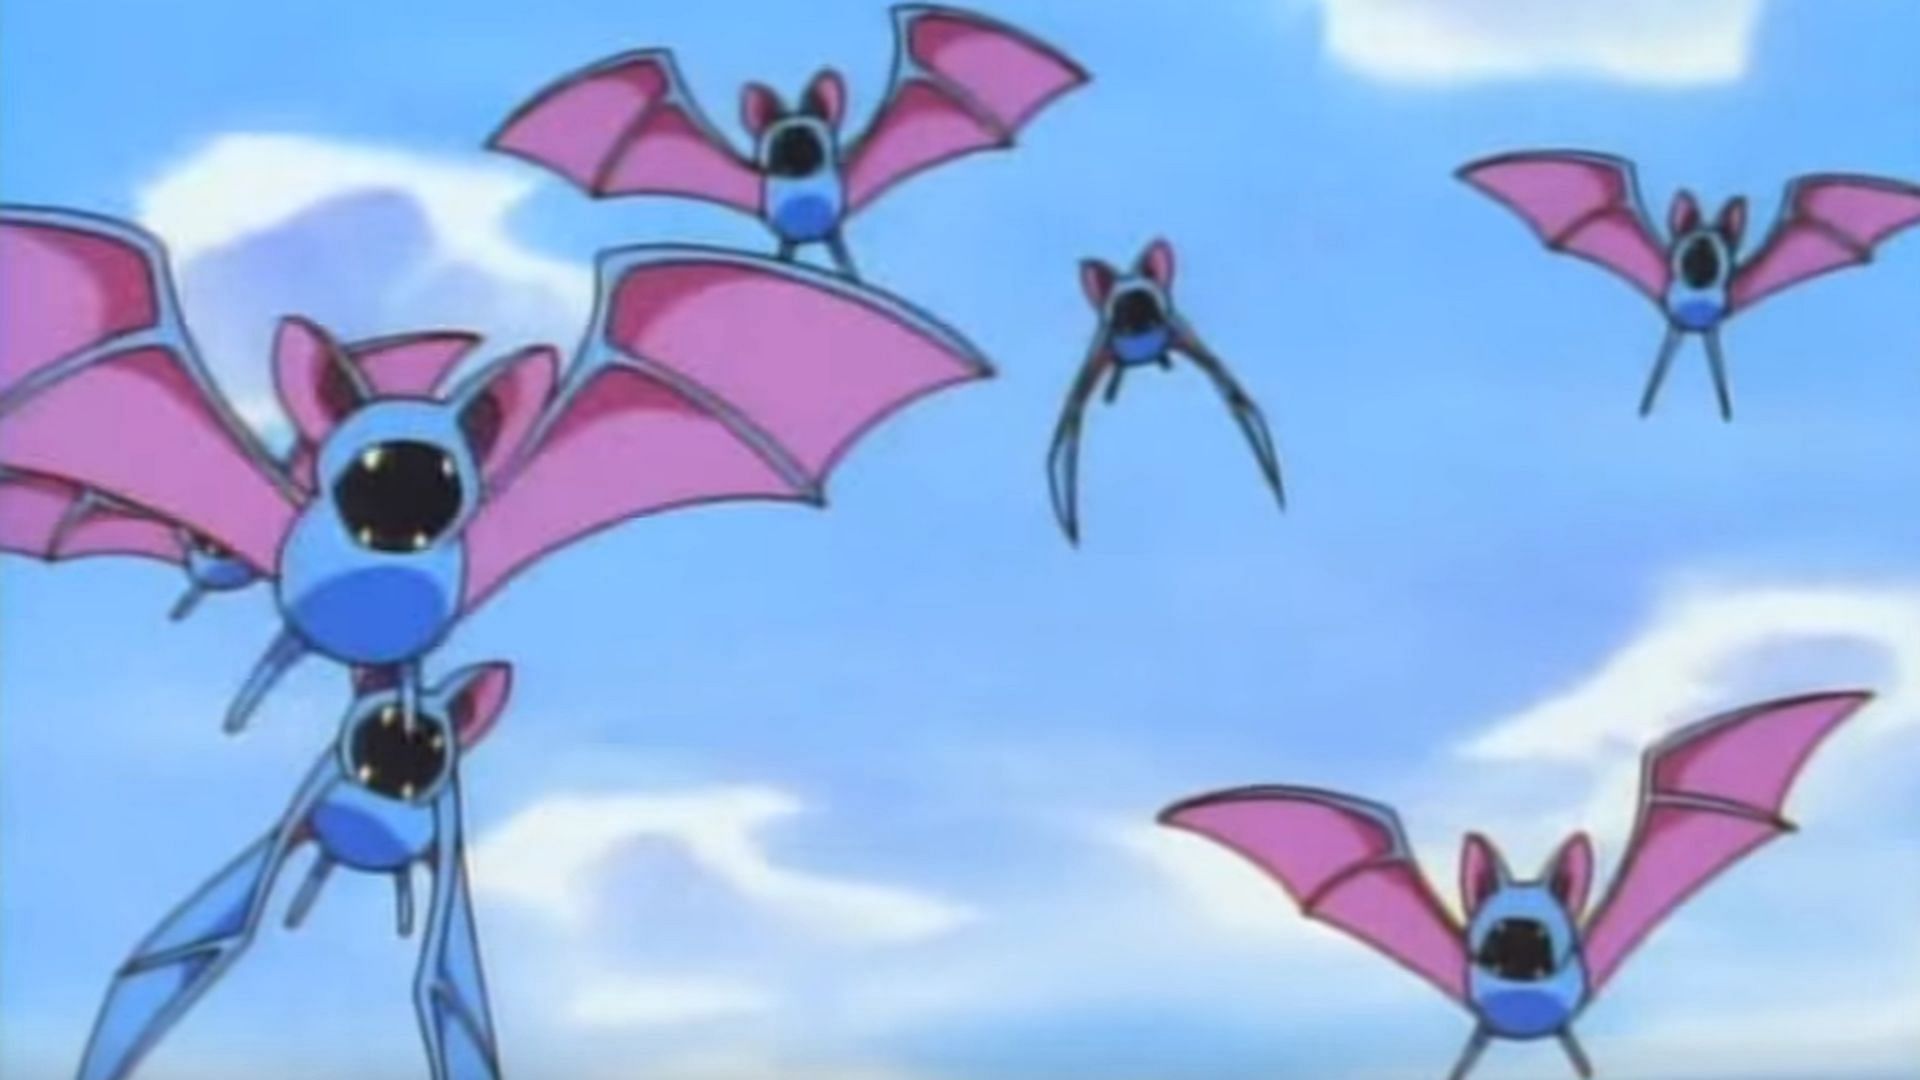 Zubats will annoy any trainer that enters a cave (Image credits: OLM Incorporated, Pokemon: Indigo League)